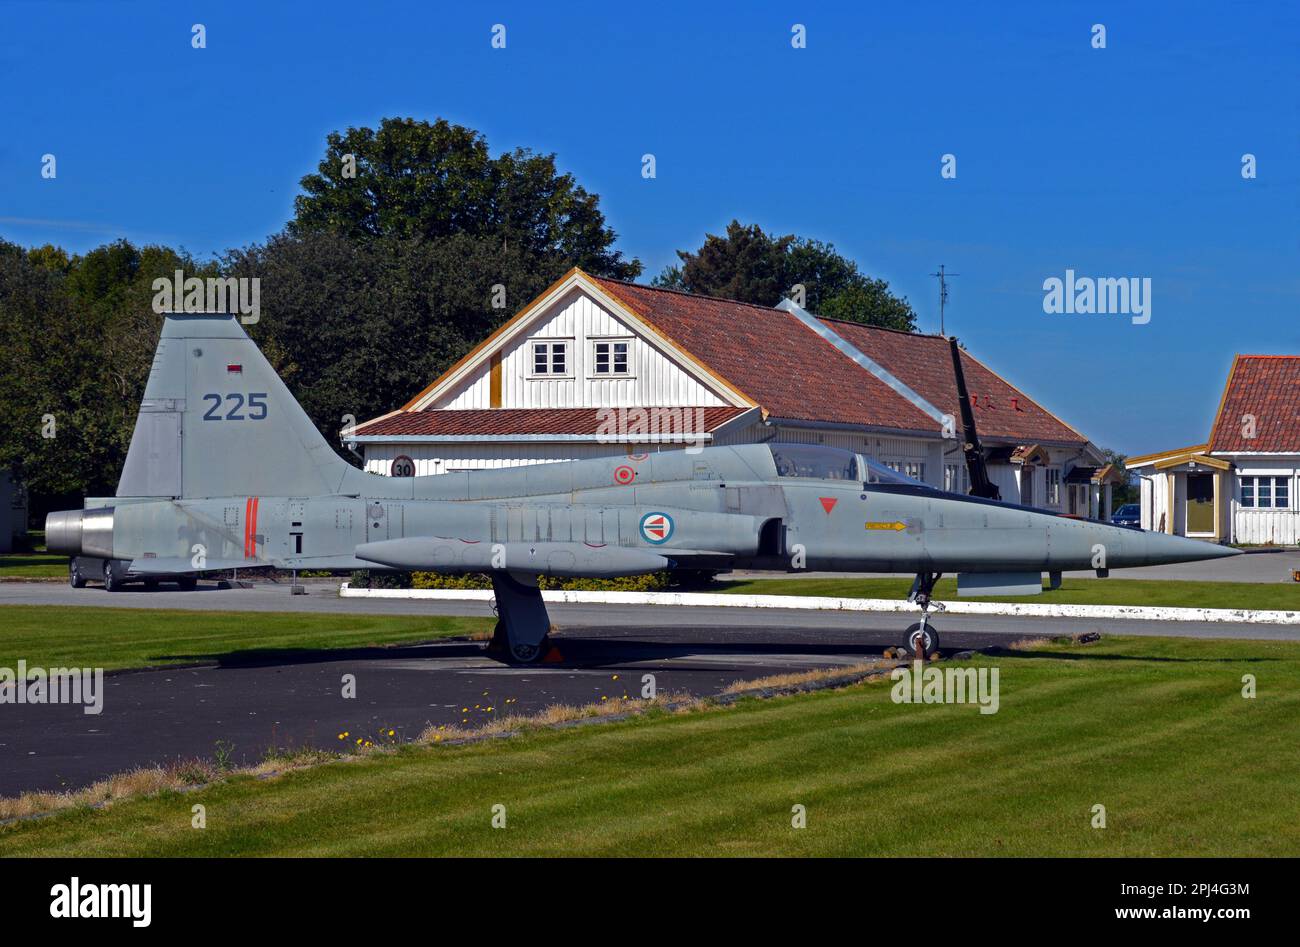 Northrop F-5B Freedom Fighter "225" of the Royal Norwegian Air Force, preserved at Sola Airbase, Stavanger, Norway. Stock Photo